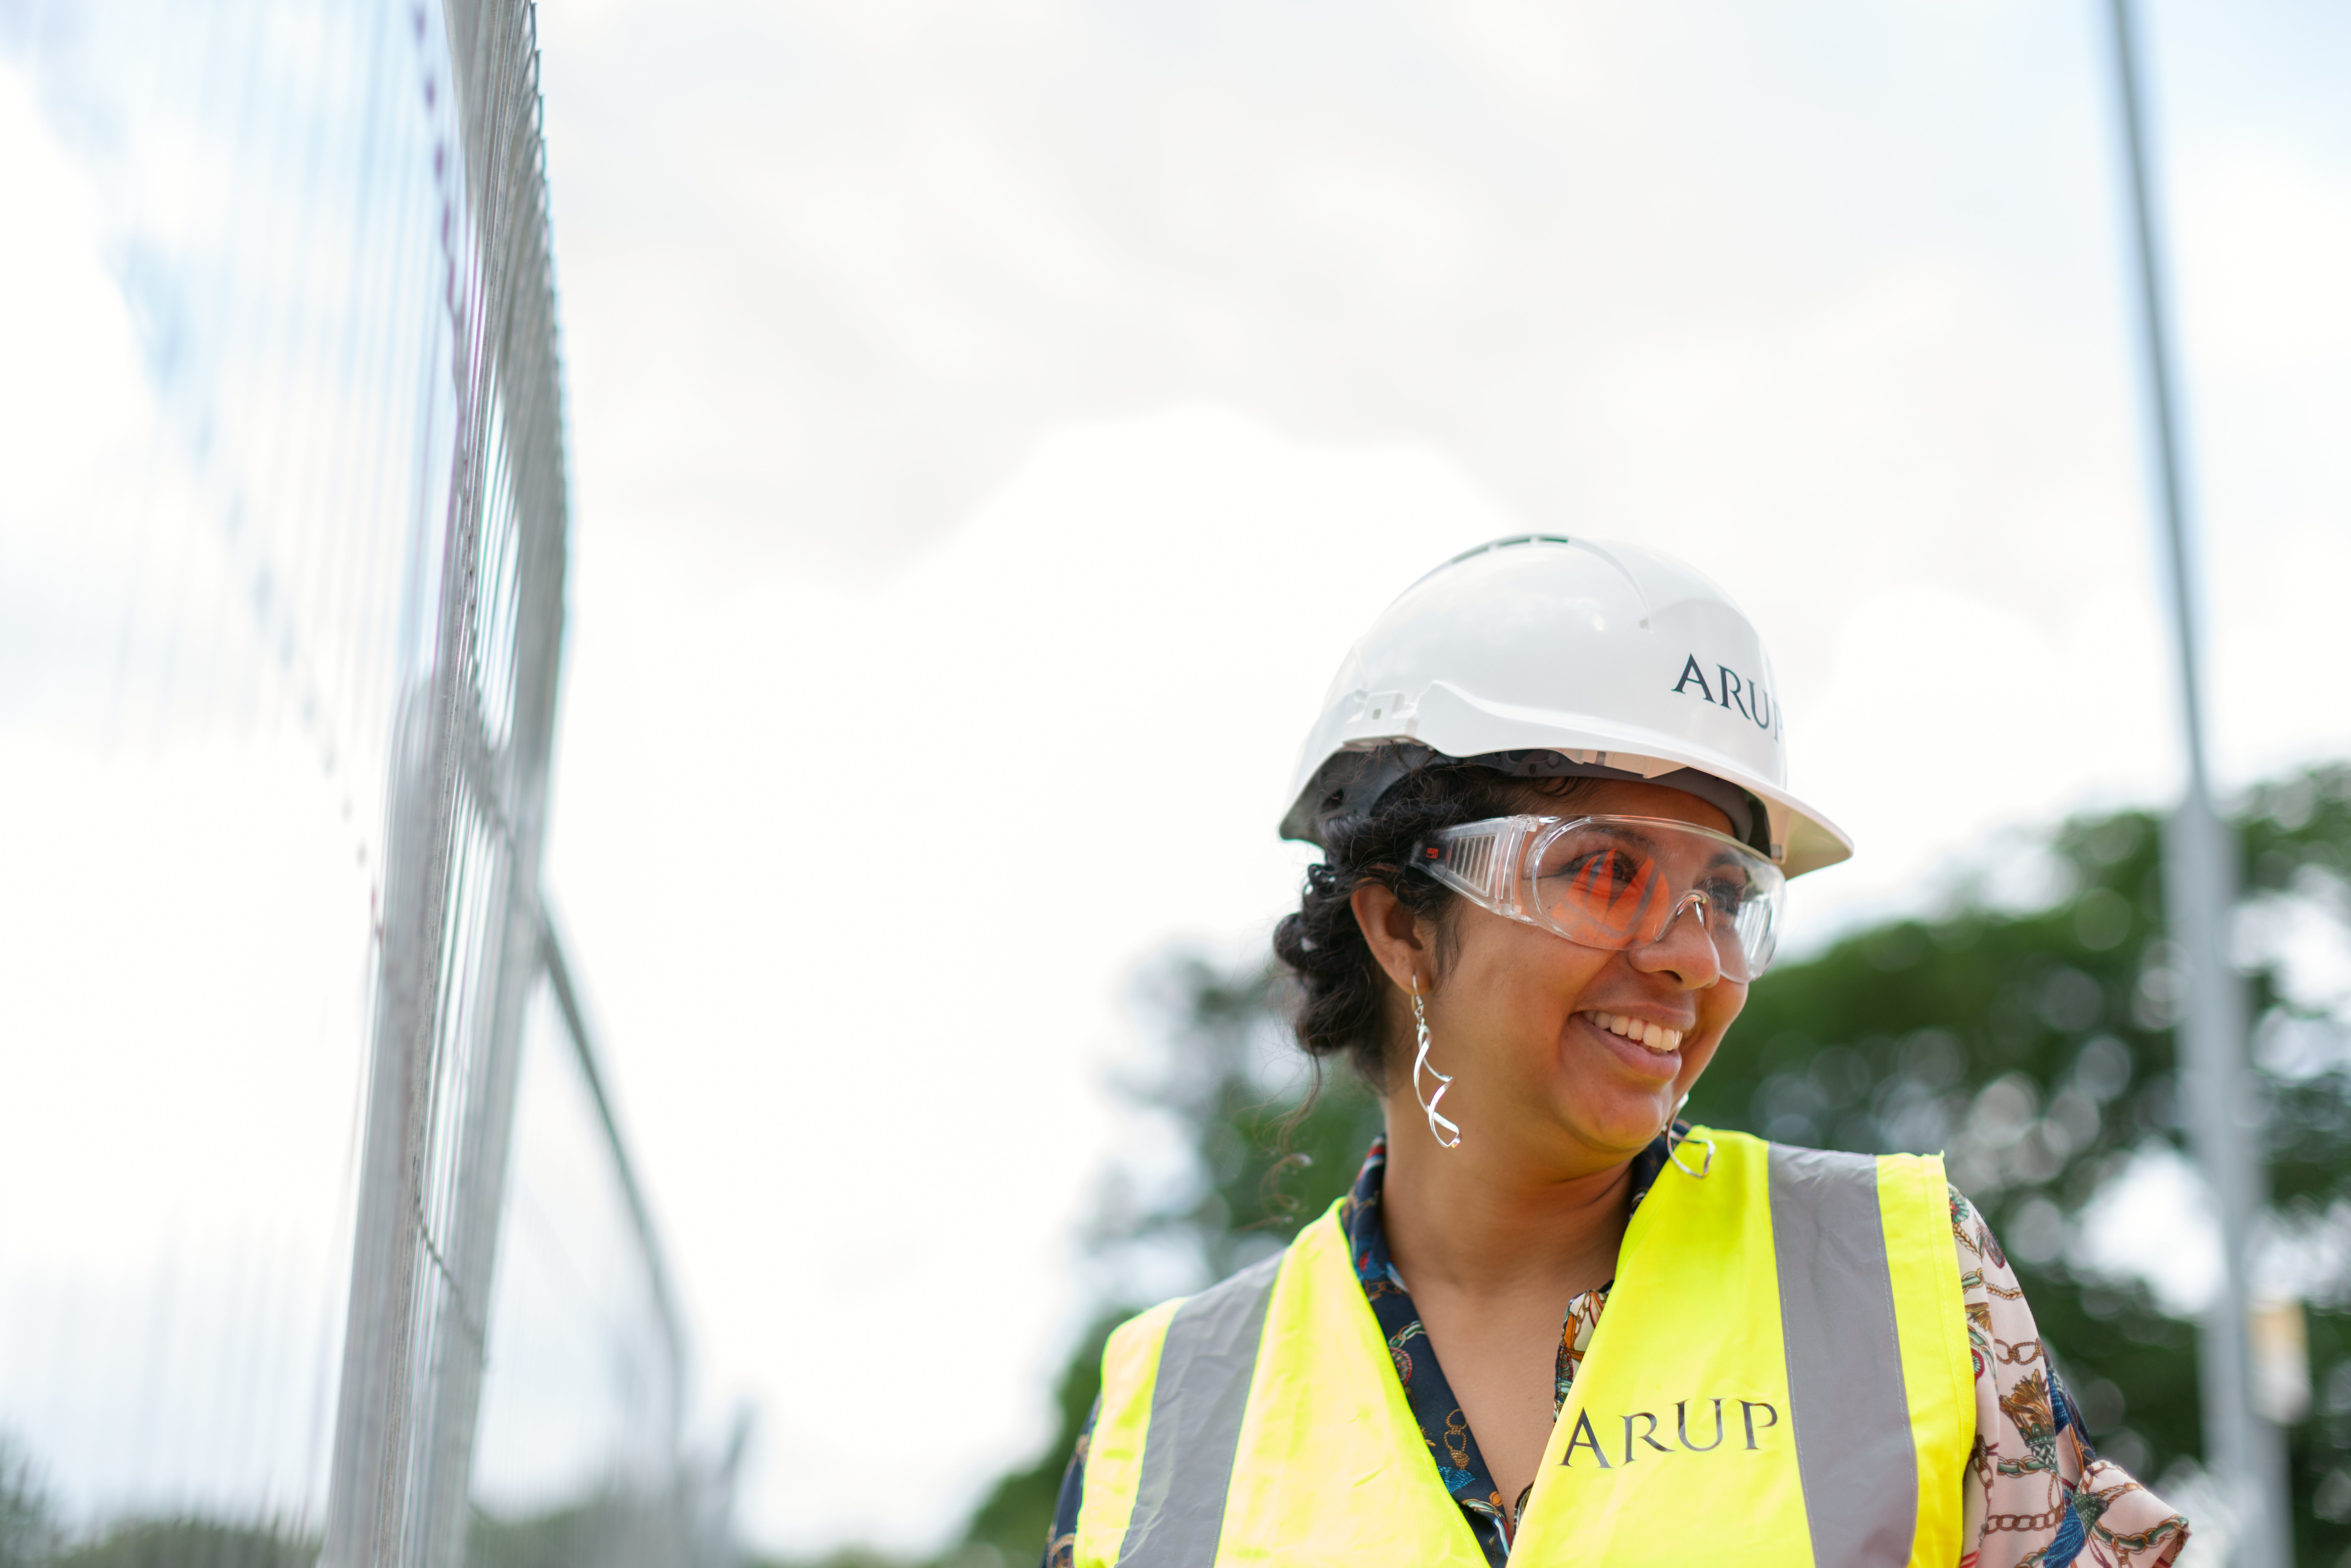 Woman wearing hard hat and yellow vest